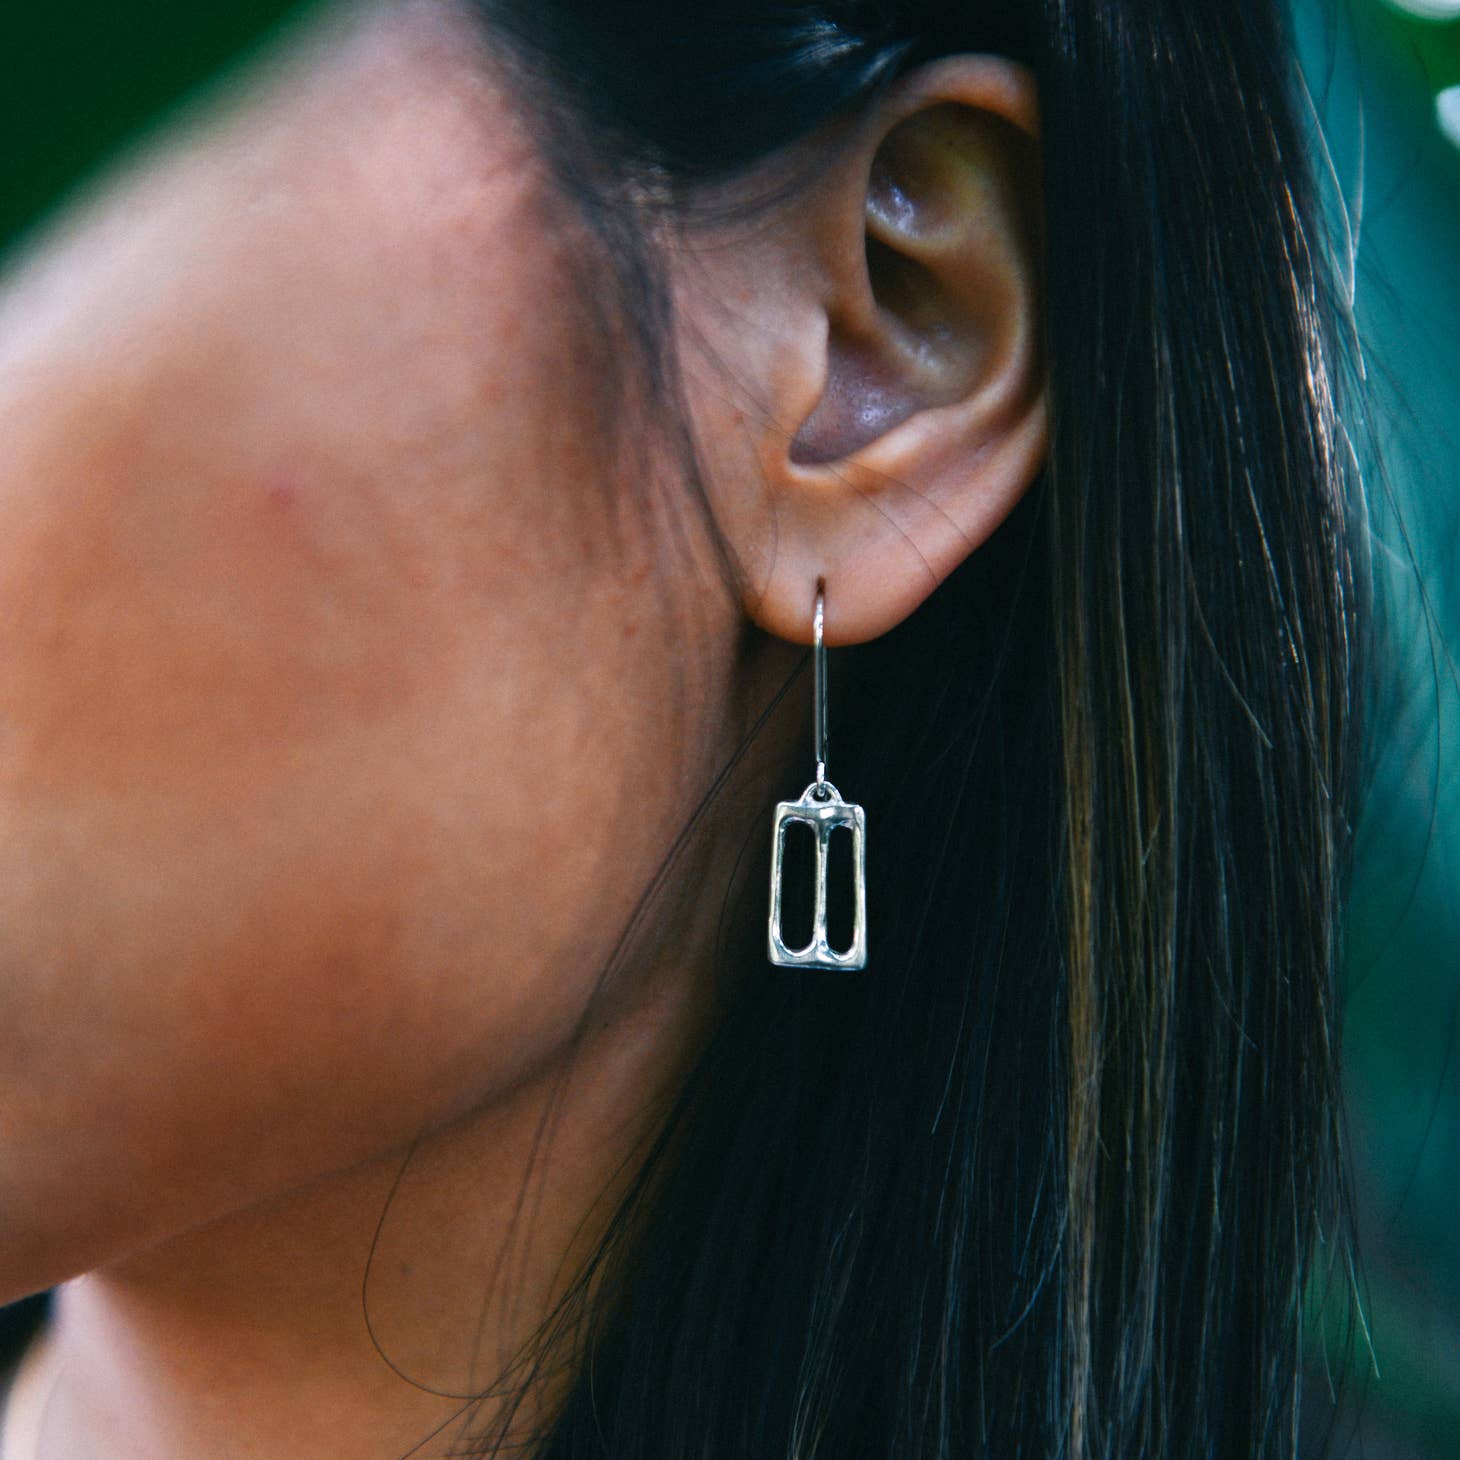 These earrings have been lovingly hand carved in wax, then cast in sterling silver metal using the lost wax casting process.